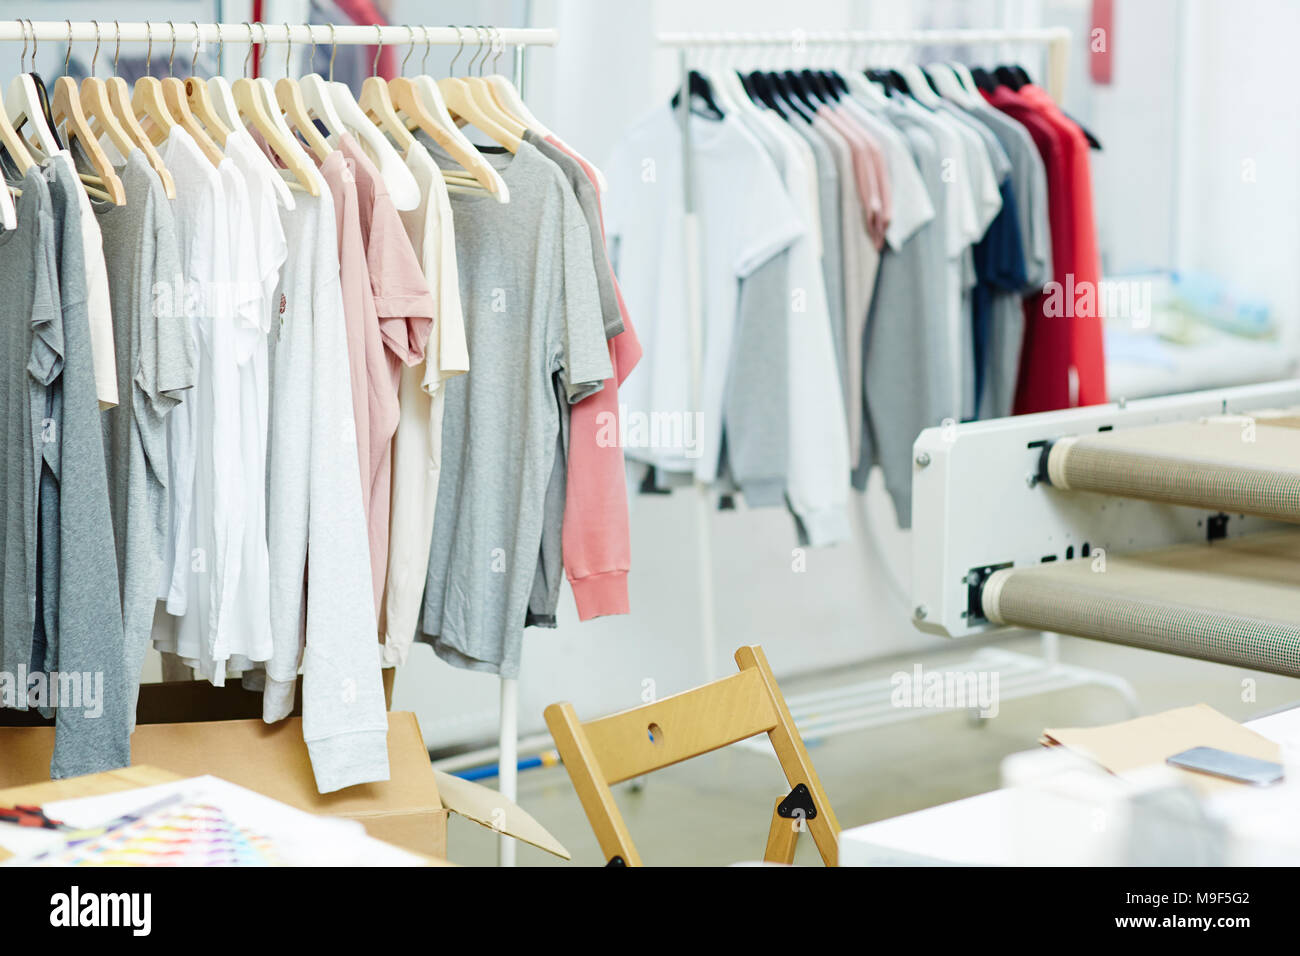 Women dresses new collection of stylish clothes wear hanging on hangers Stock Photo